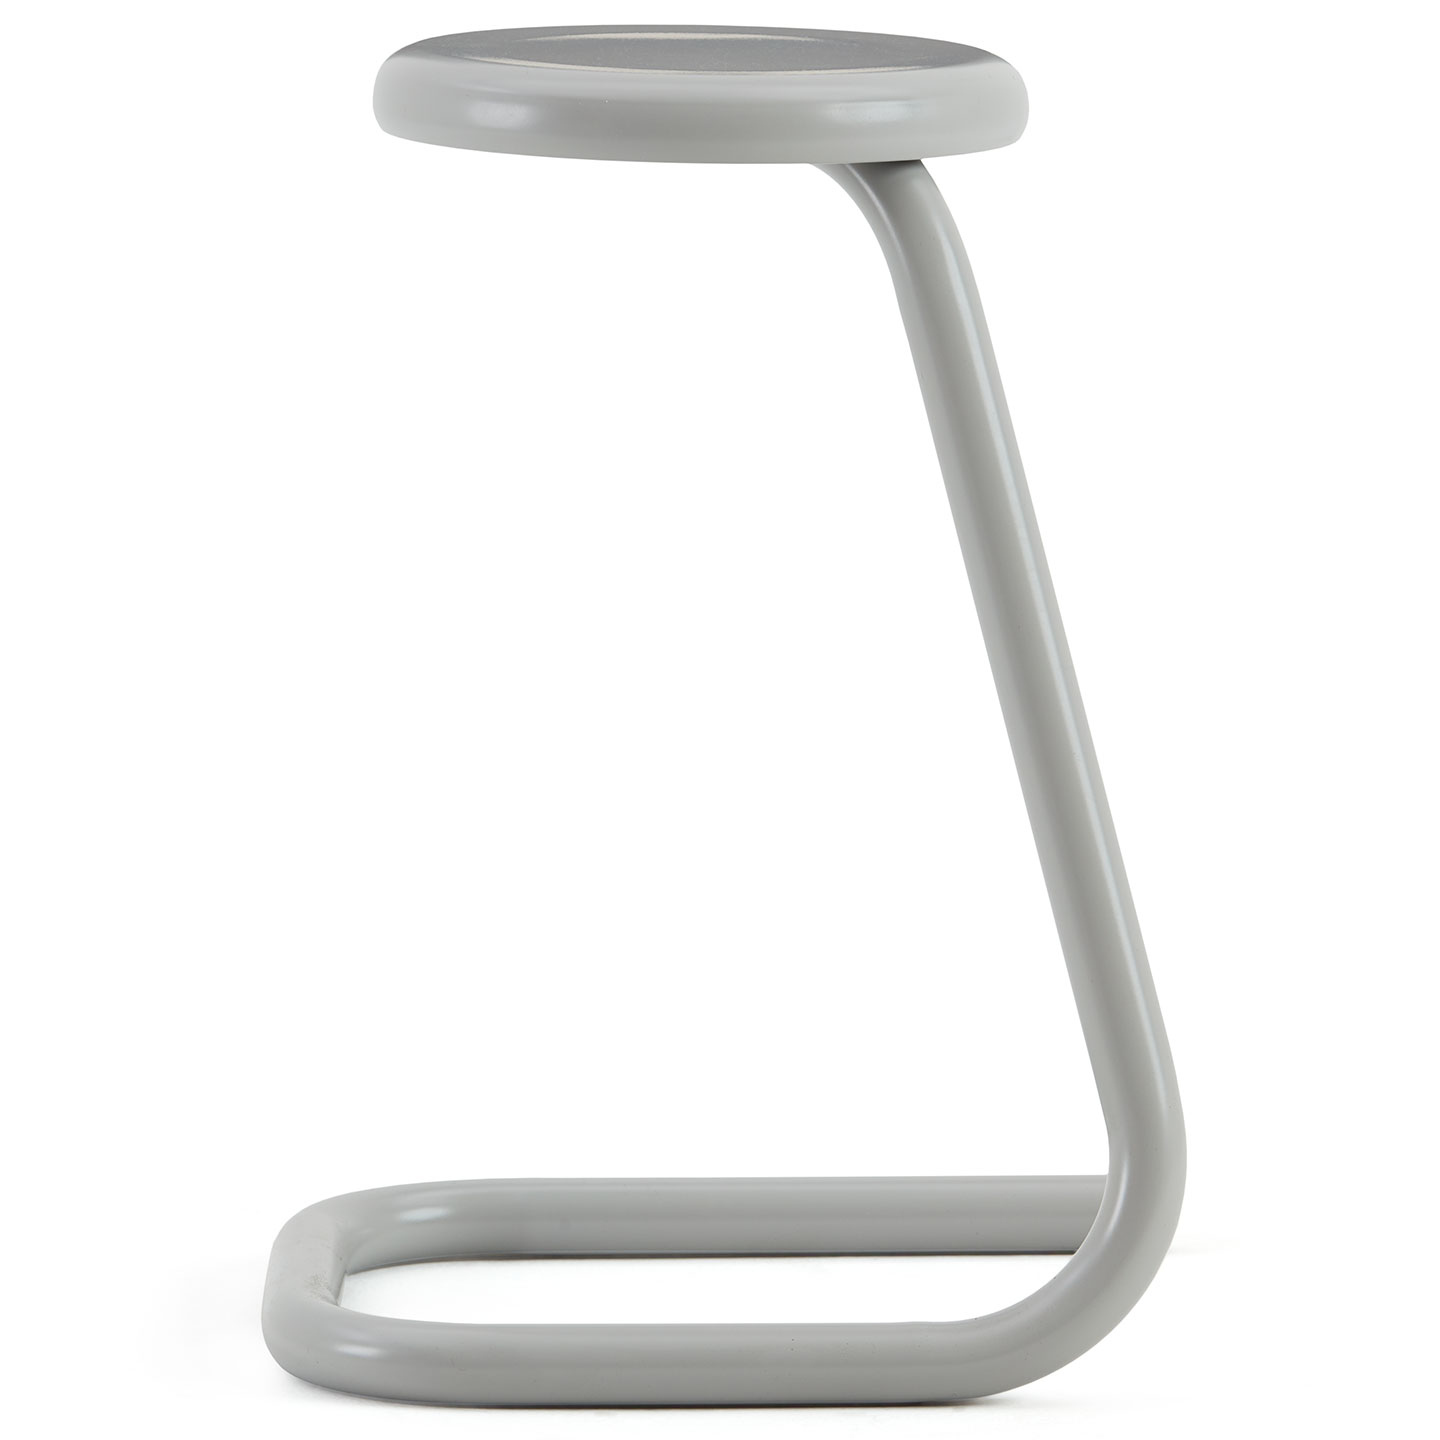 Haworth K700 stool in light grey color front view